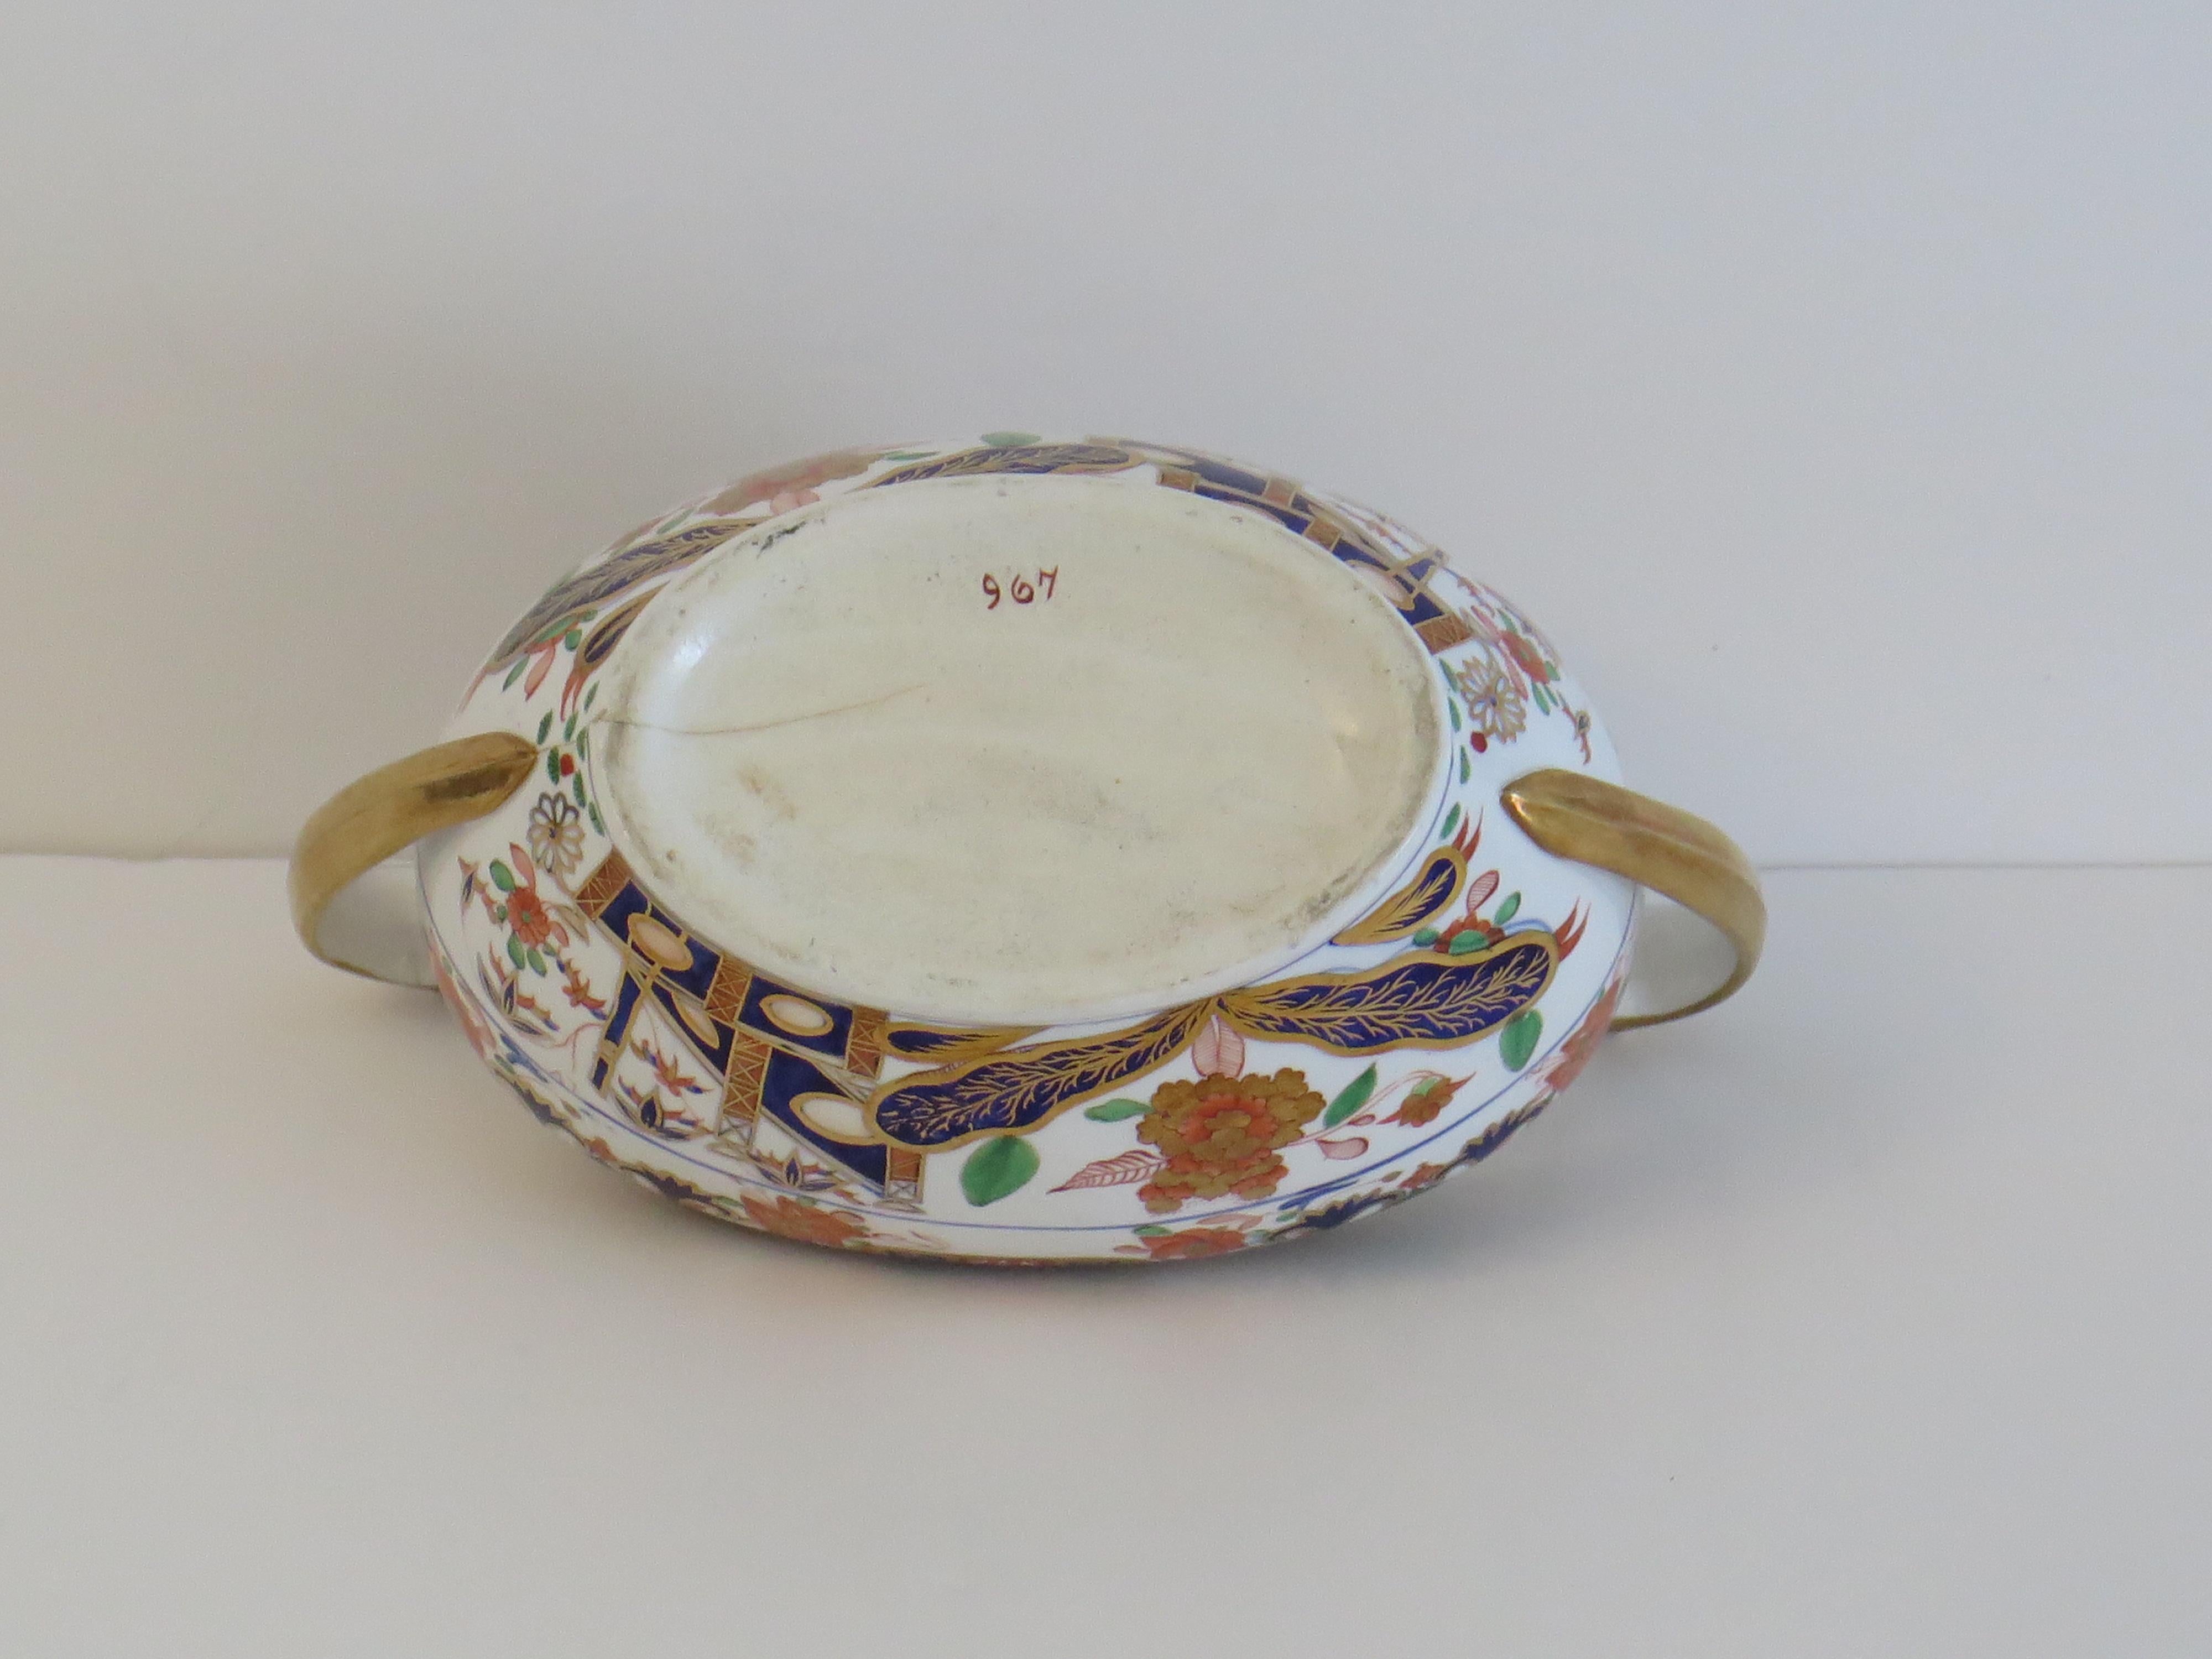 Spode Porcelain Sucrier Hand Painted and Gilded Pattern 967, circa 1810 For Sale 2